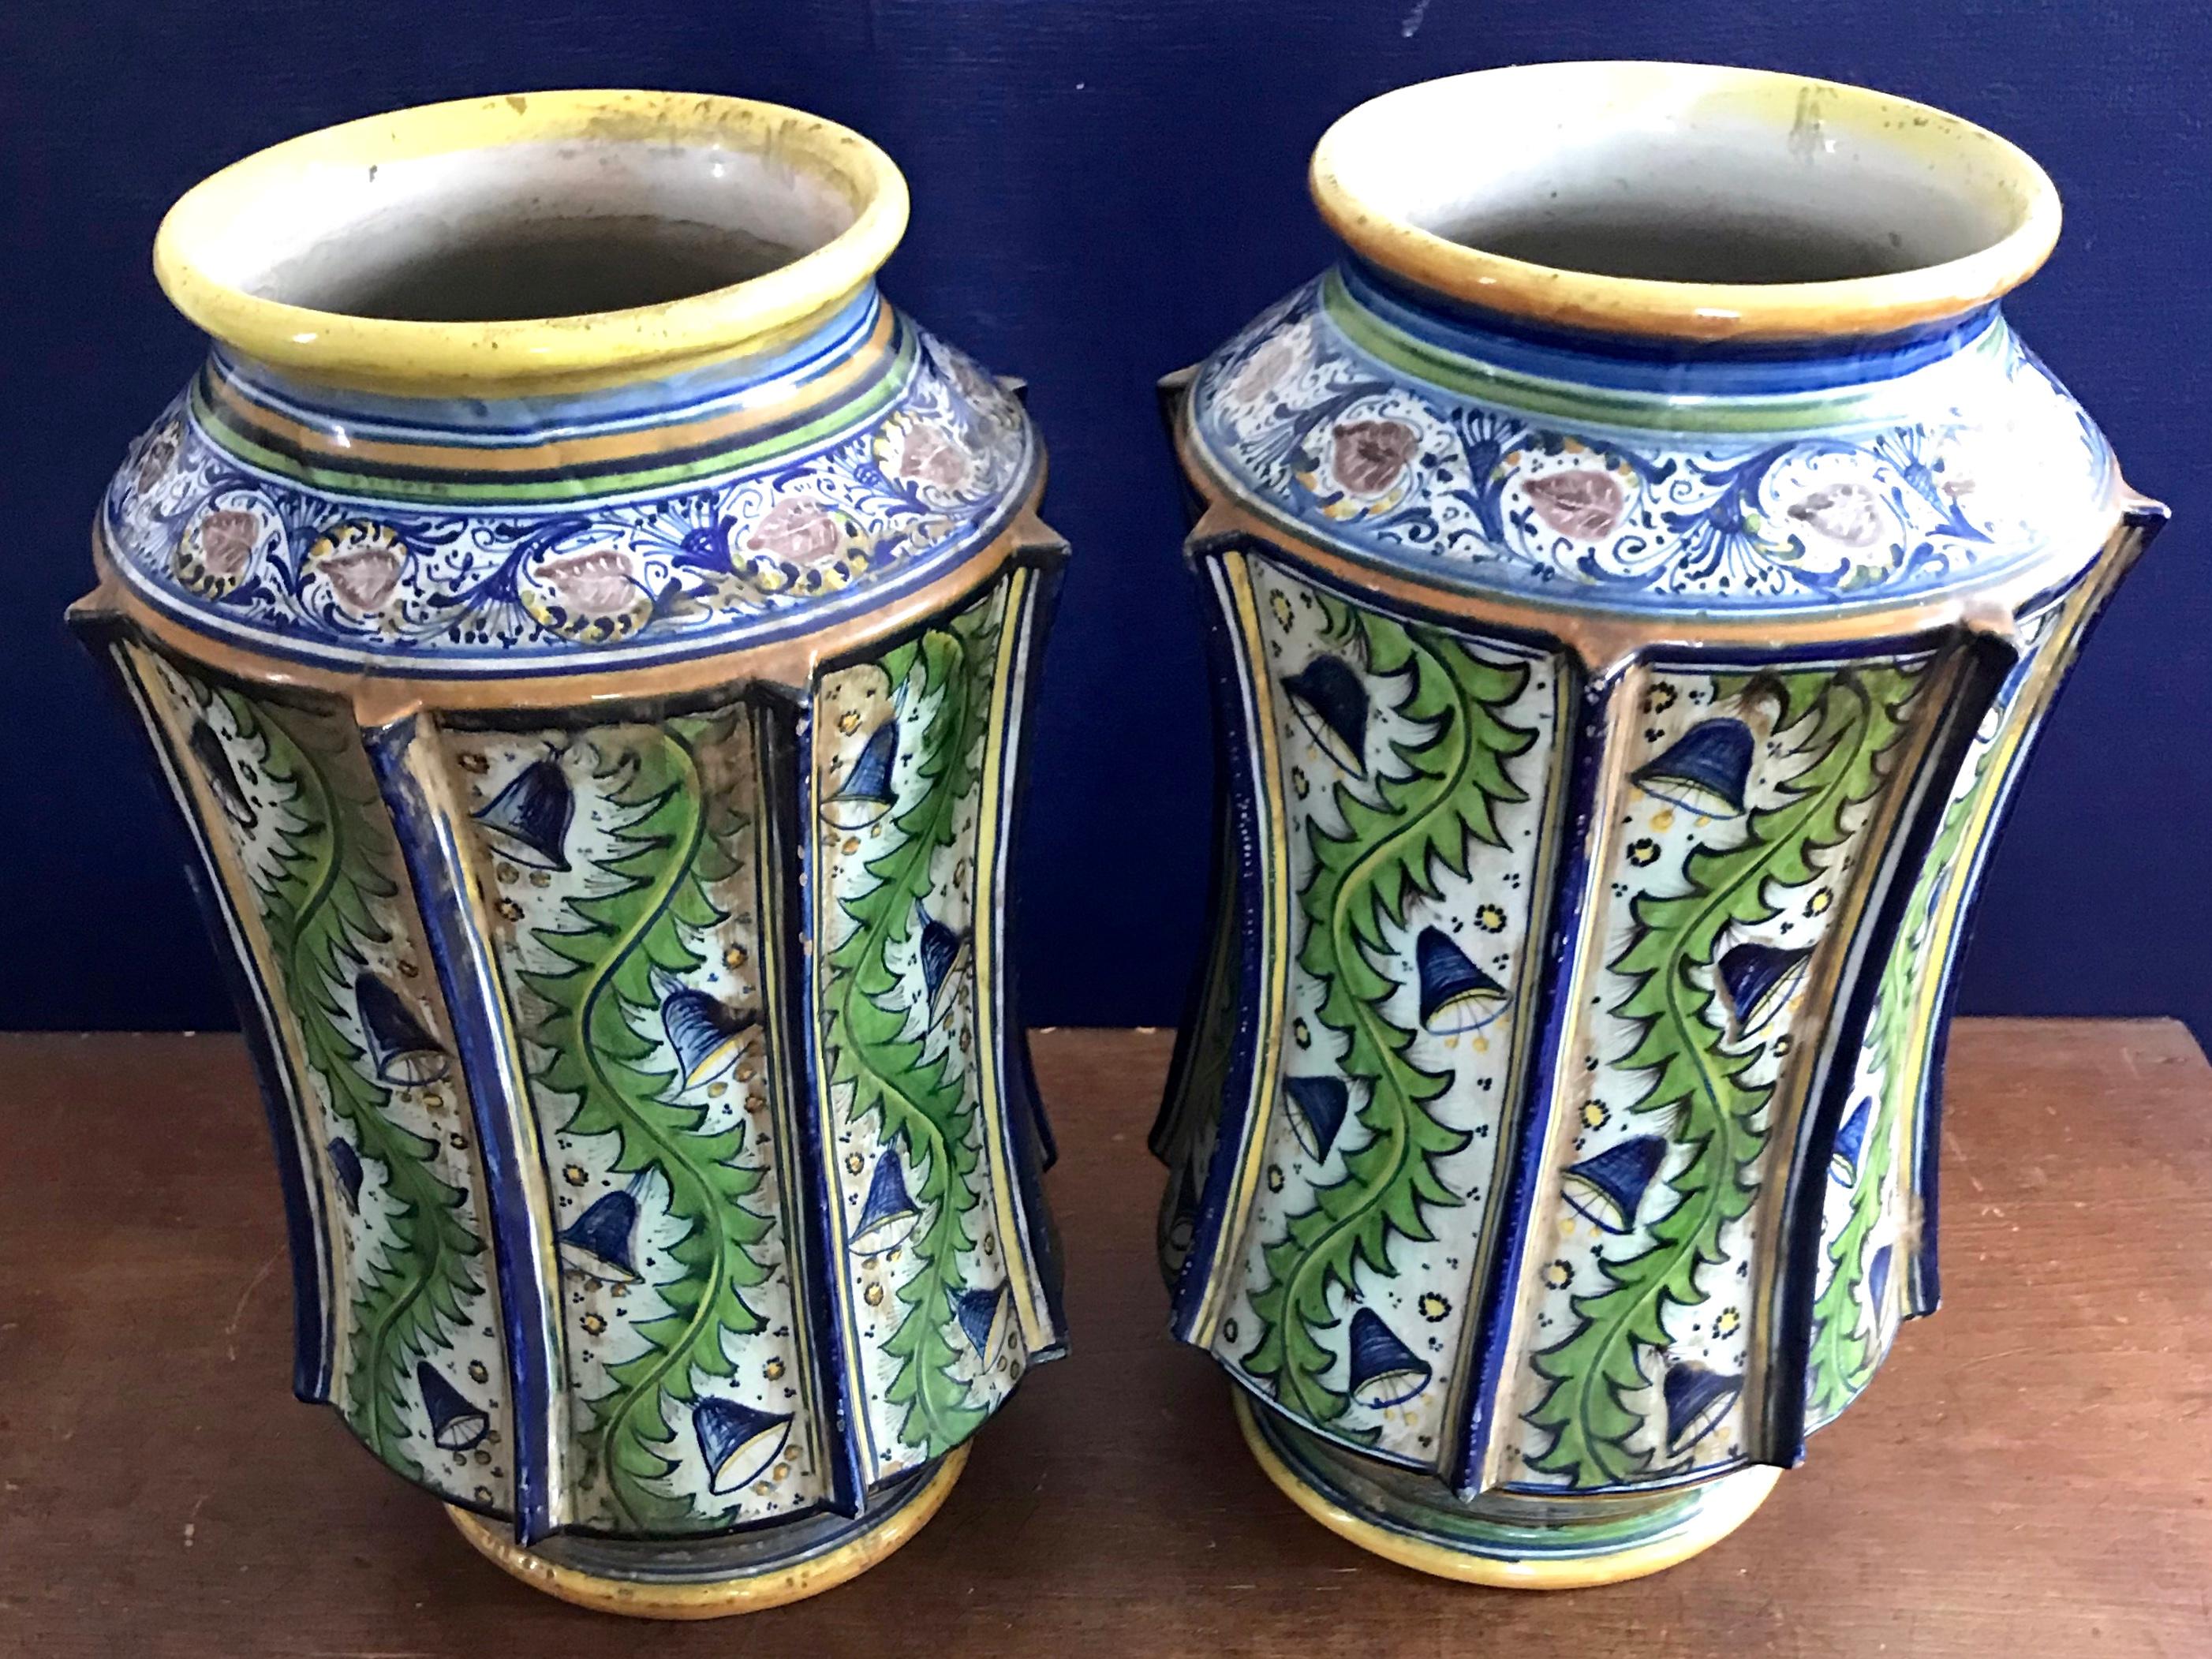 Pair large green and blue majolica apothecary jar vases. Italian cylindrical ribbed and slightly concave tin glaze earthenware jars by the famed Cantagalli factory. With blue bell shaped flowers on green leafy garlands; yellow banded accents at rim